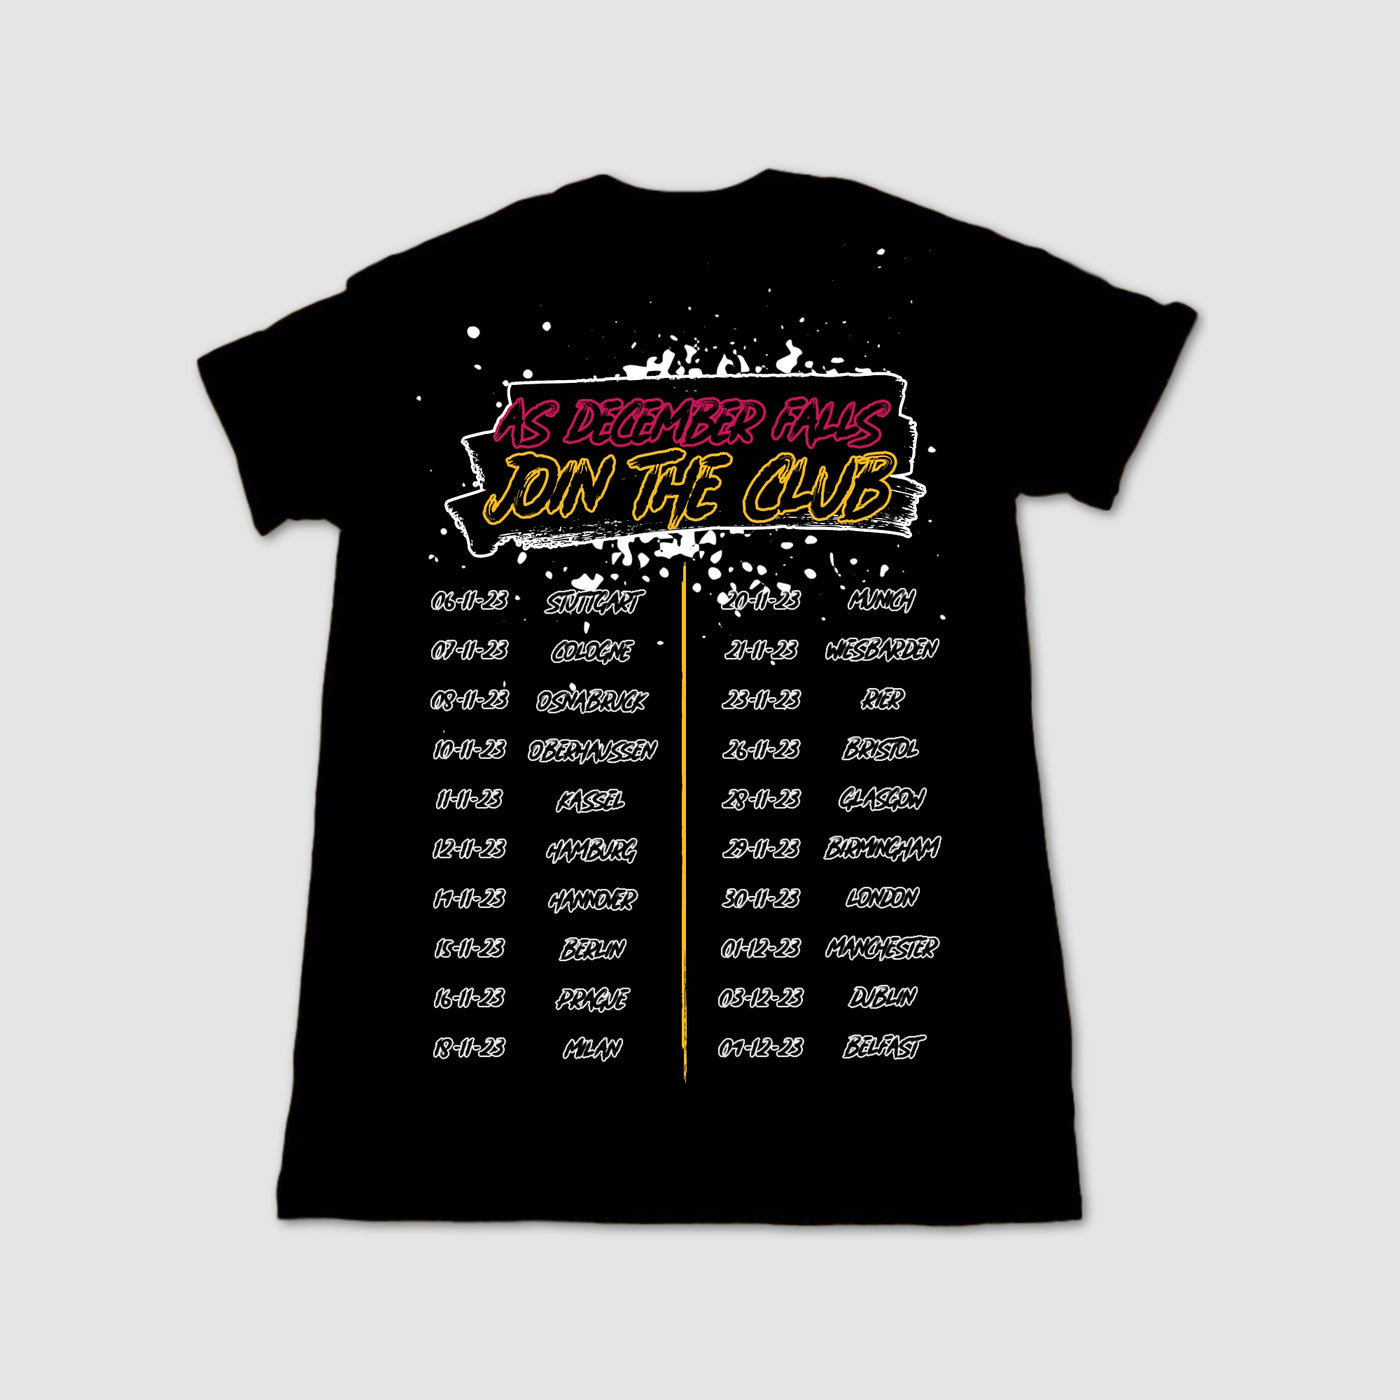 Join The Club Tour T-Shirts